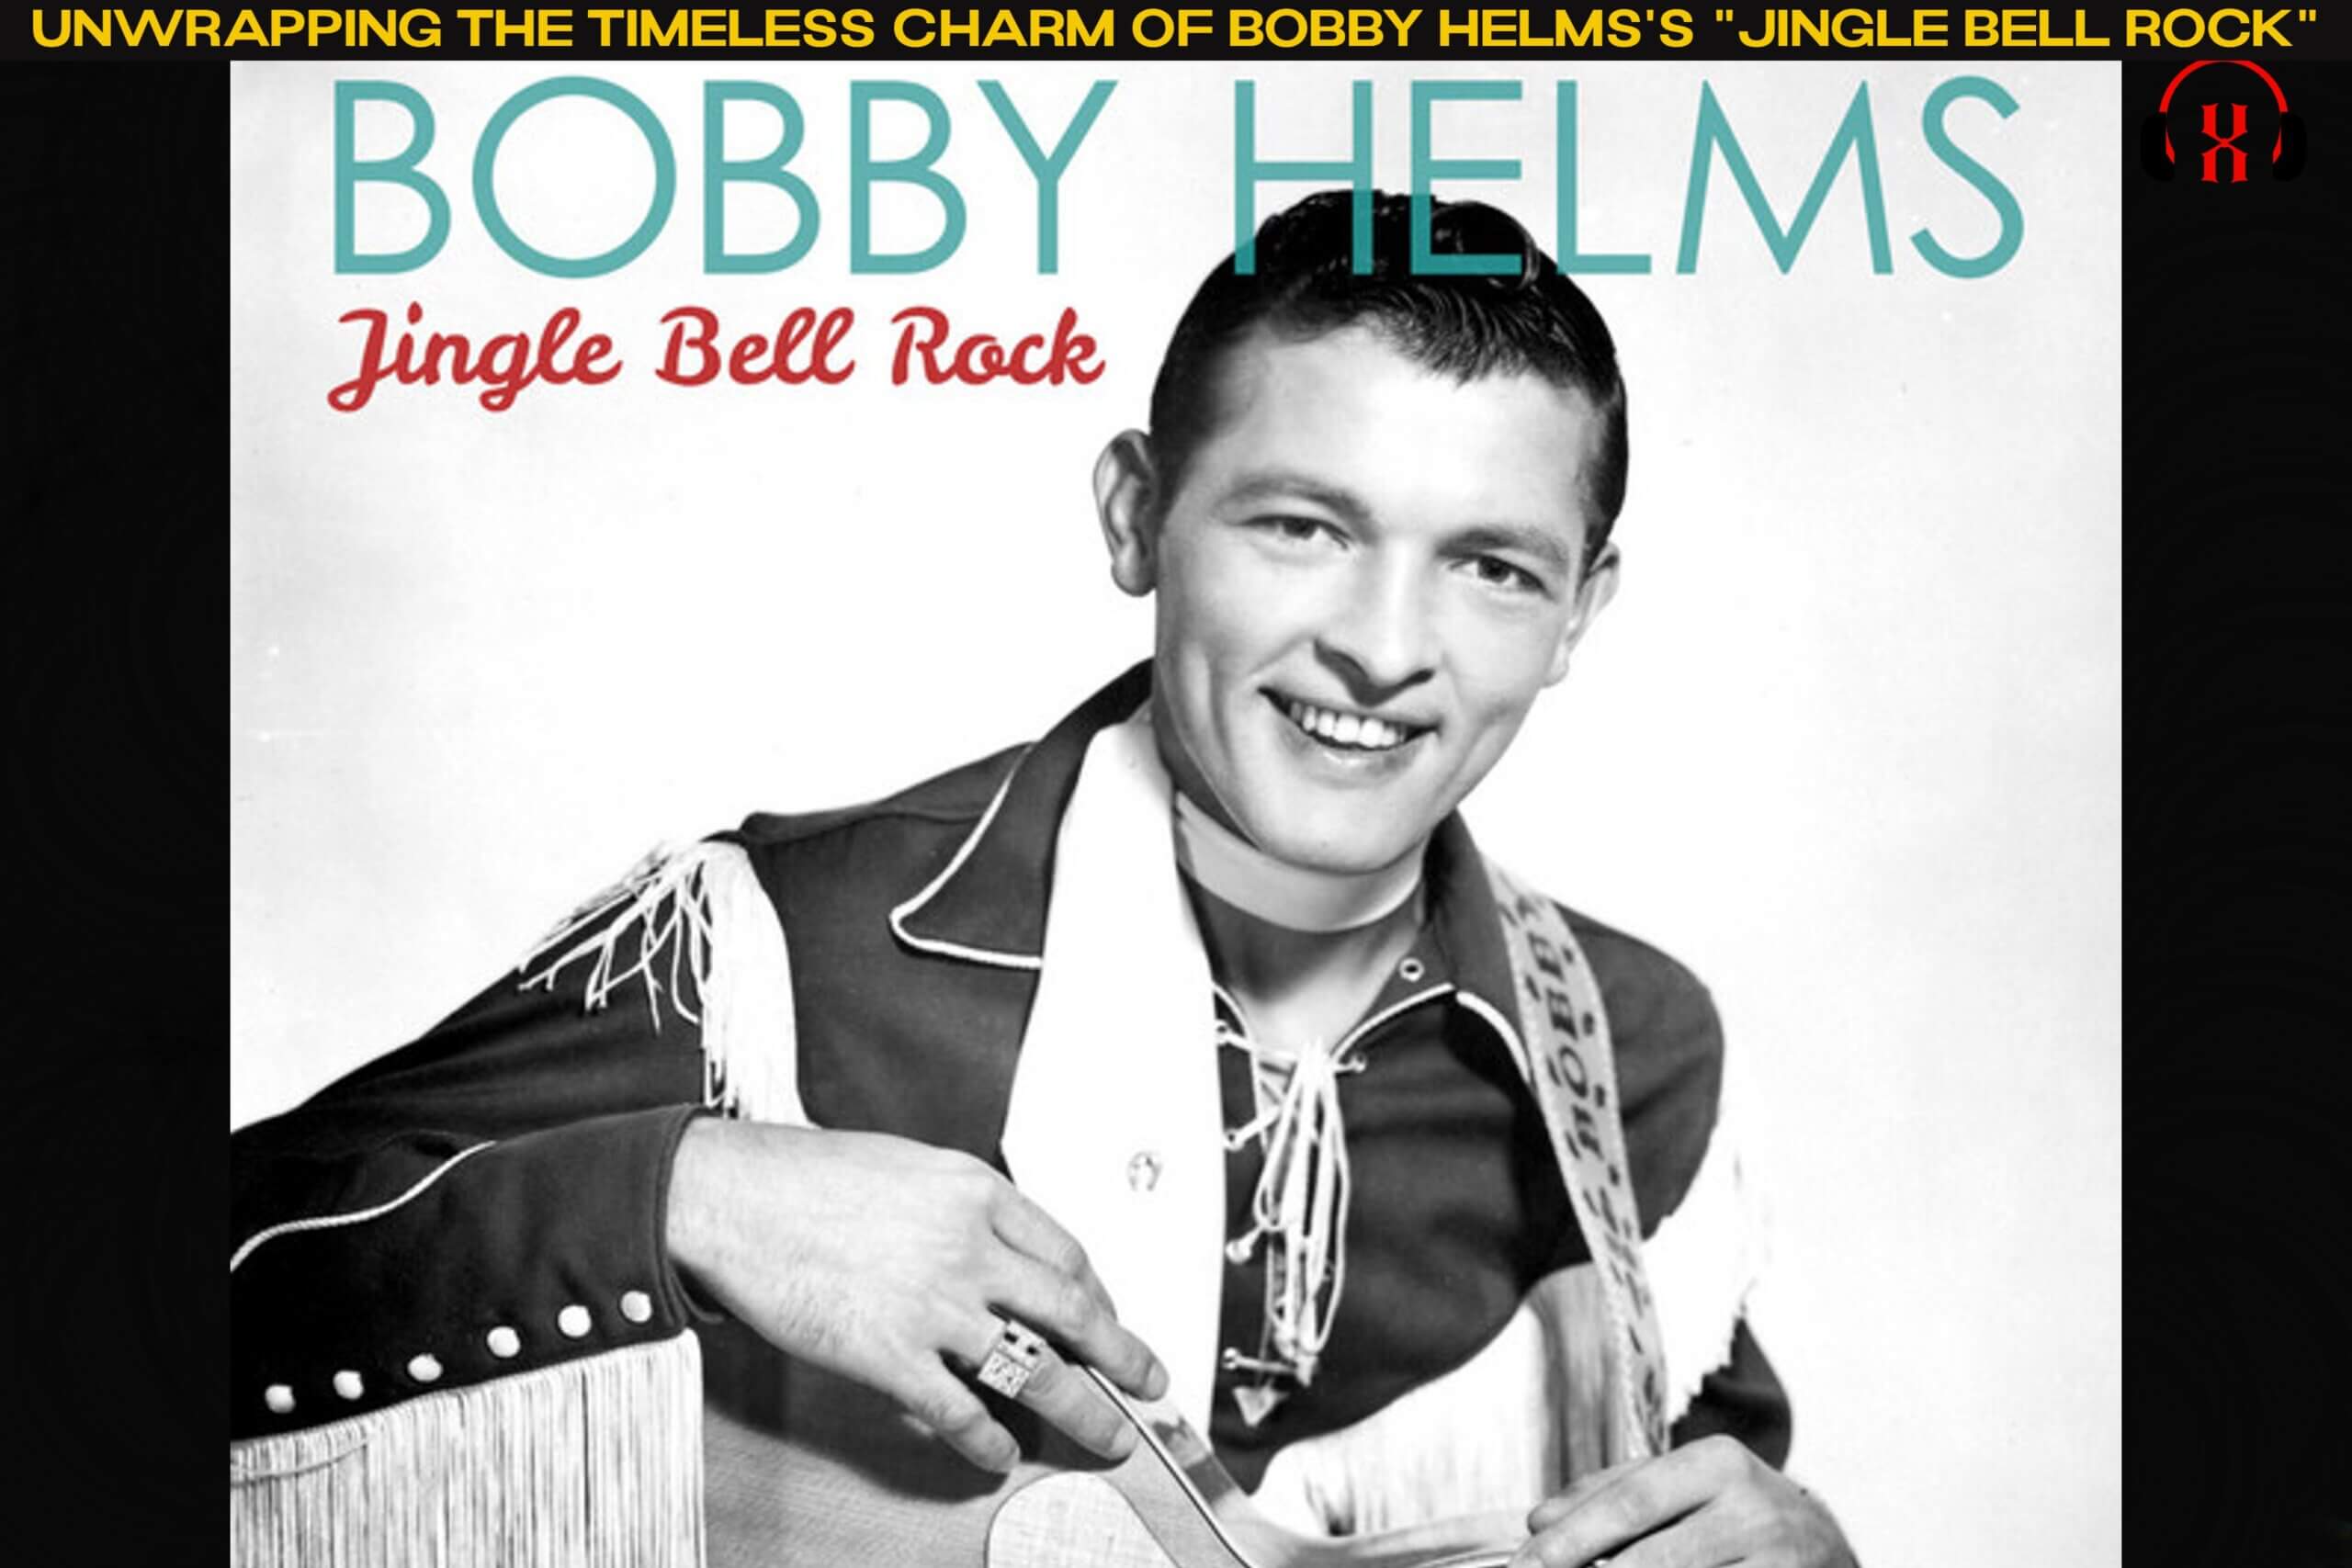 “Rocking Around the Christmas Tree: The Untold Magic of Bobby Helms’s ‘Jingle Bell Rock’ That Keeps Us Dancing Through the Decades!”